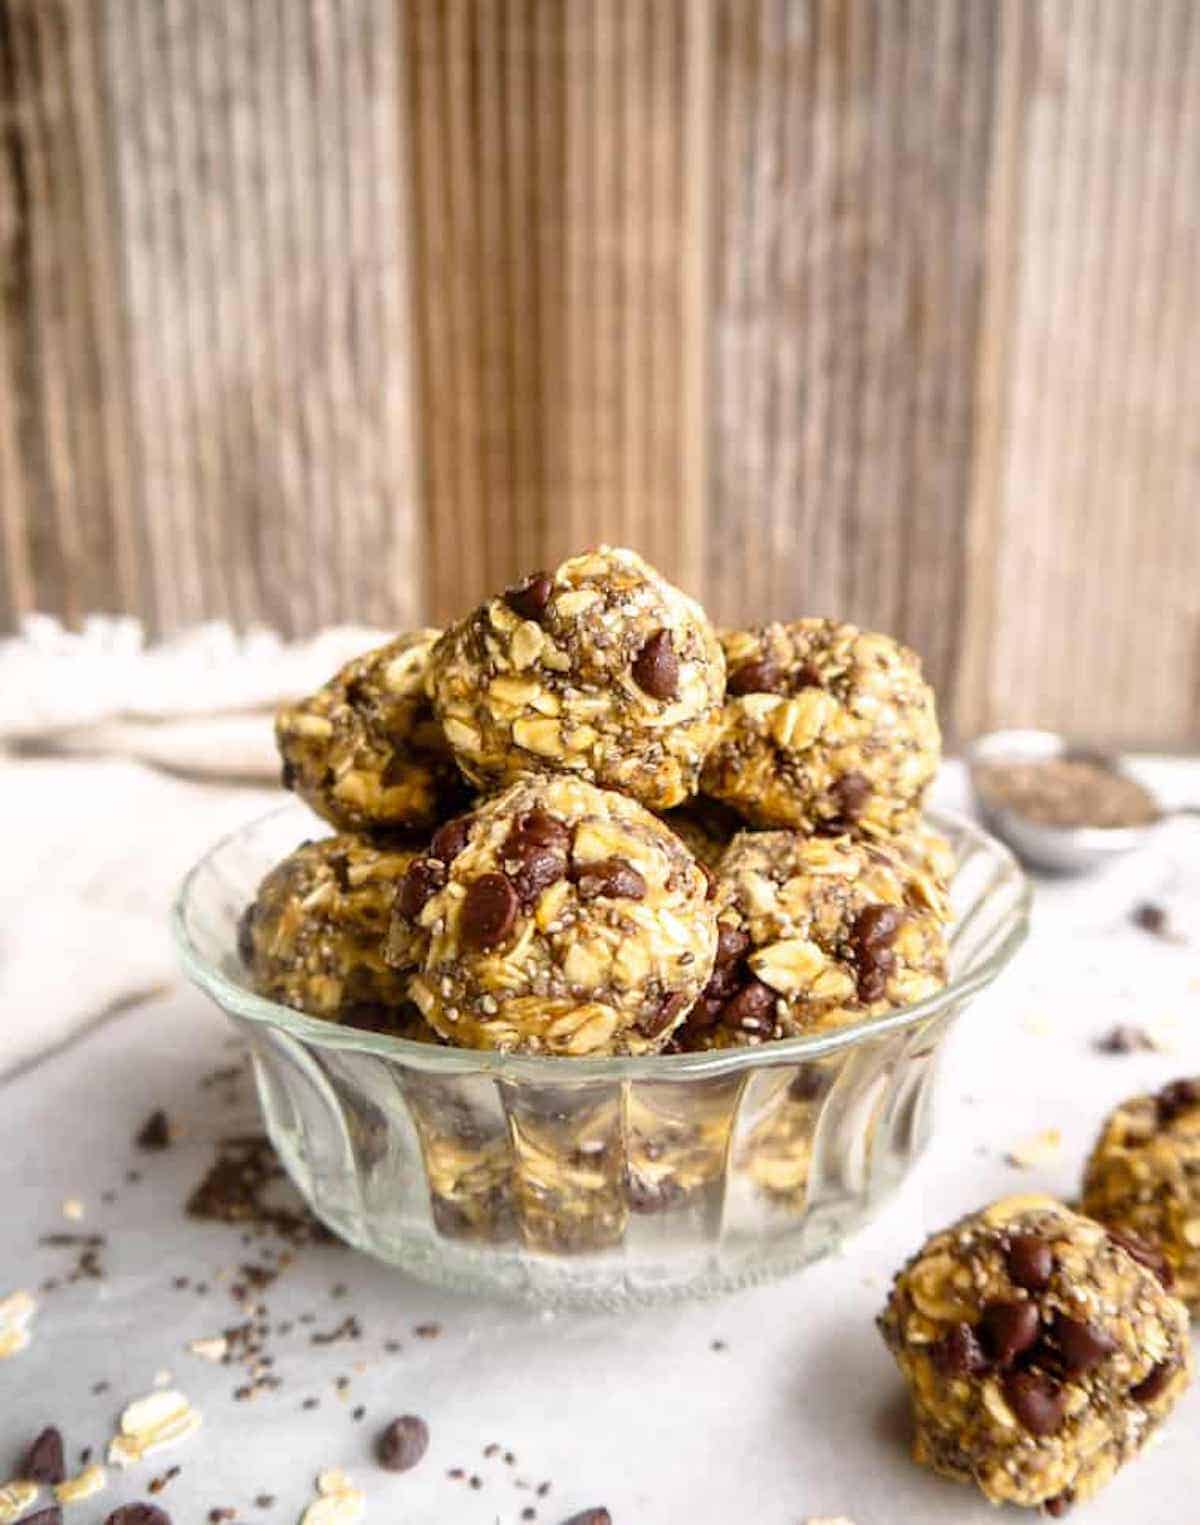 Oatmeal chocolate chip balls in a bowl.